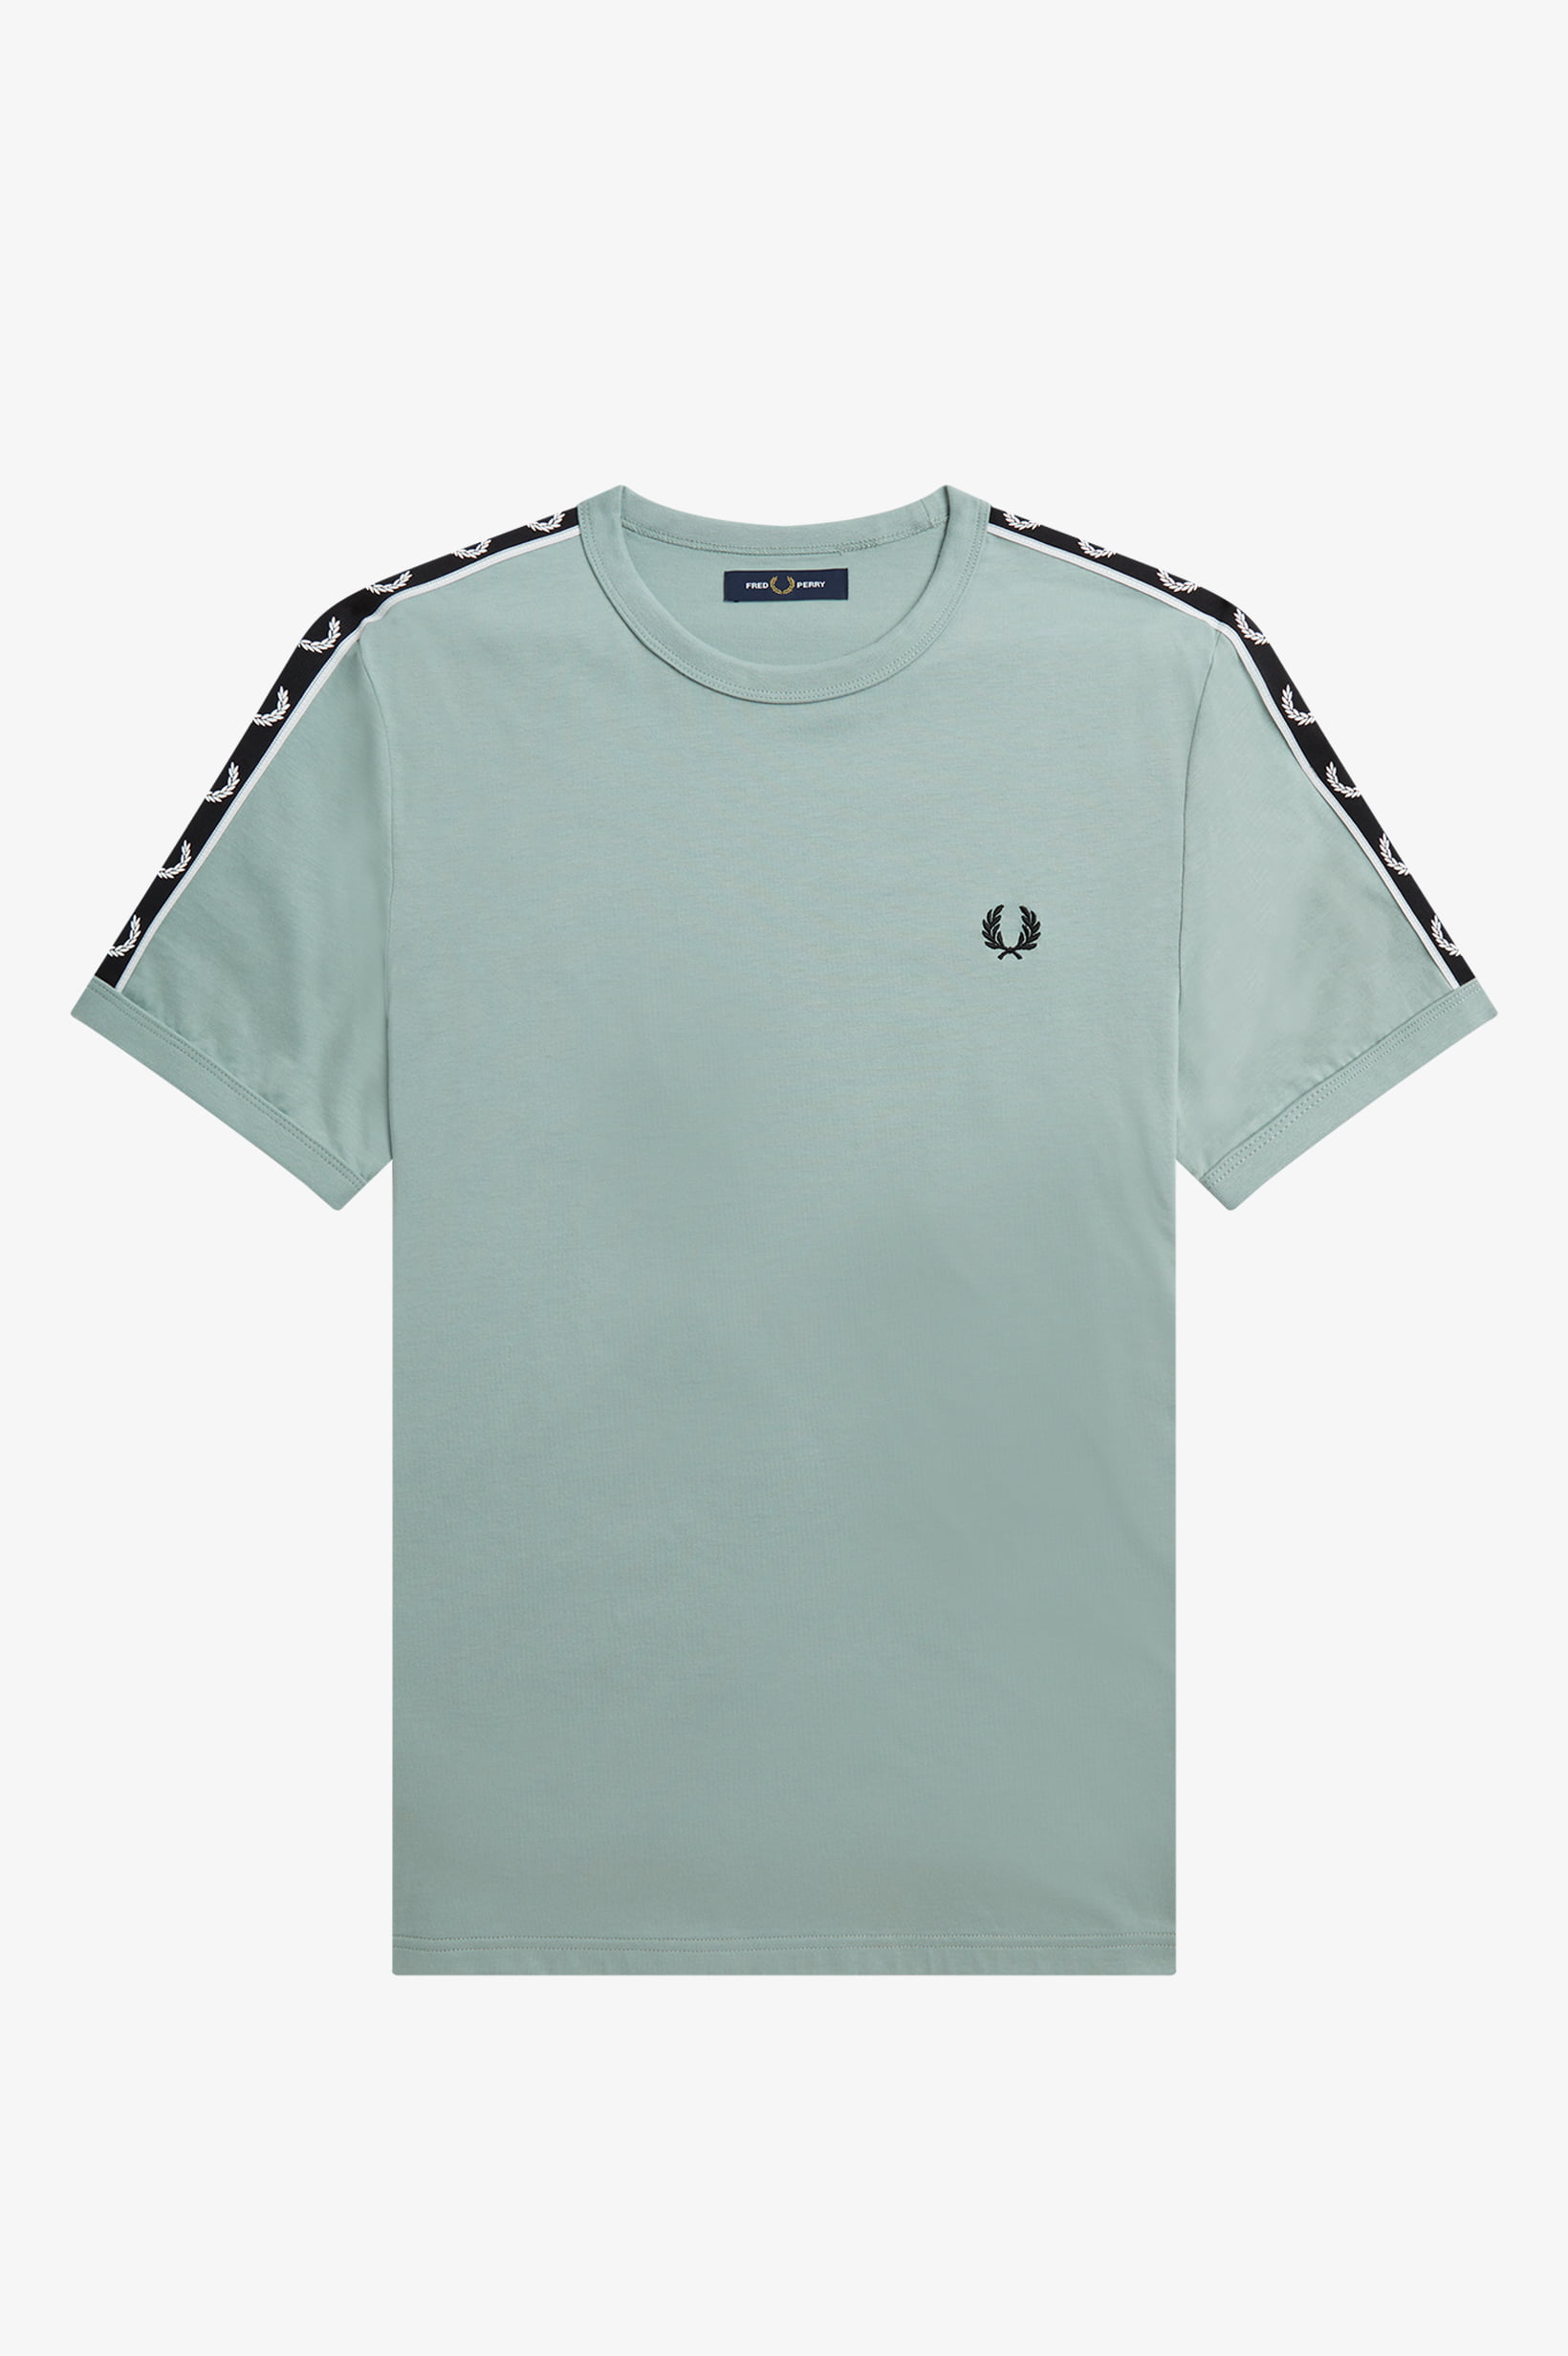 Fred Perry Taped Ringer T-Shirt Silver Blue/Black